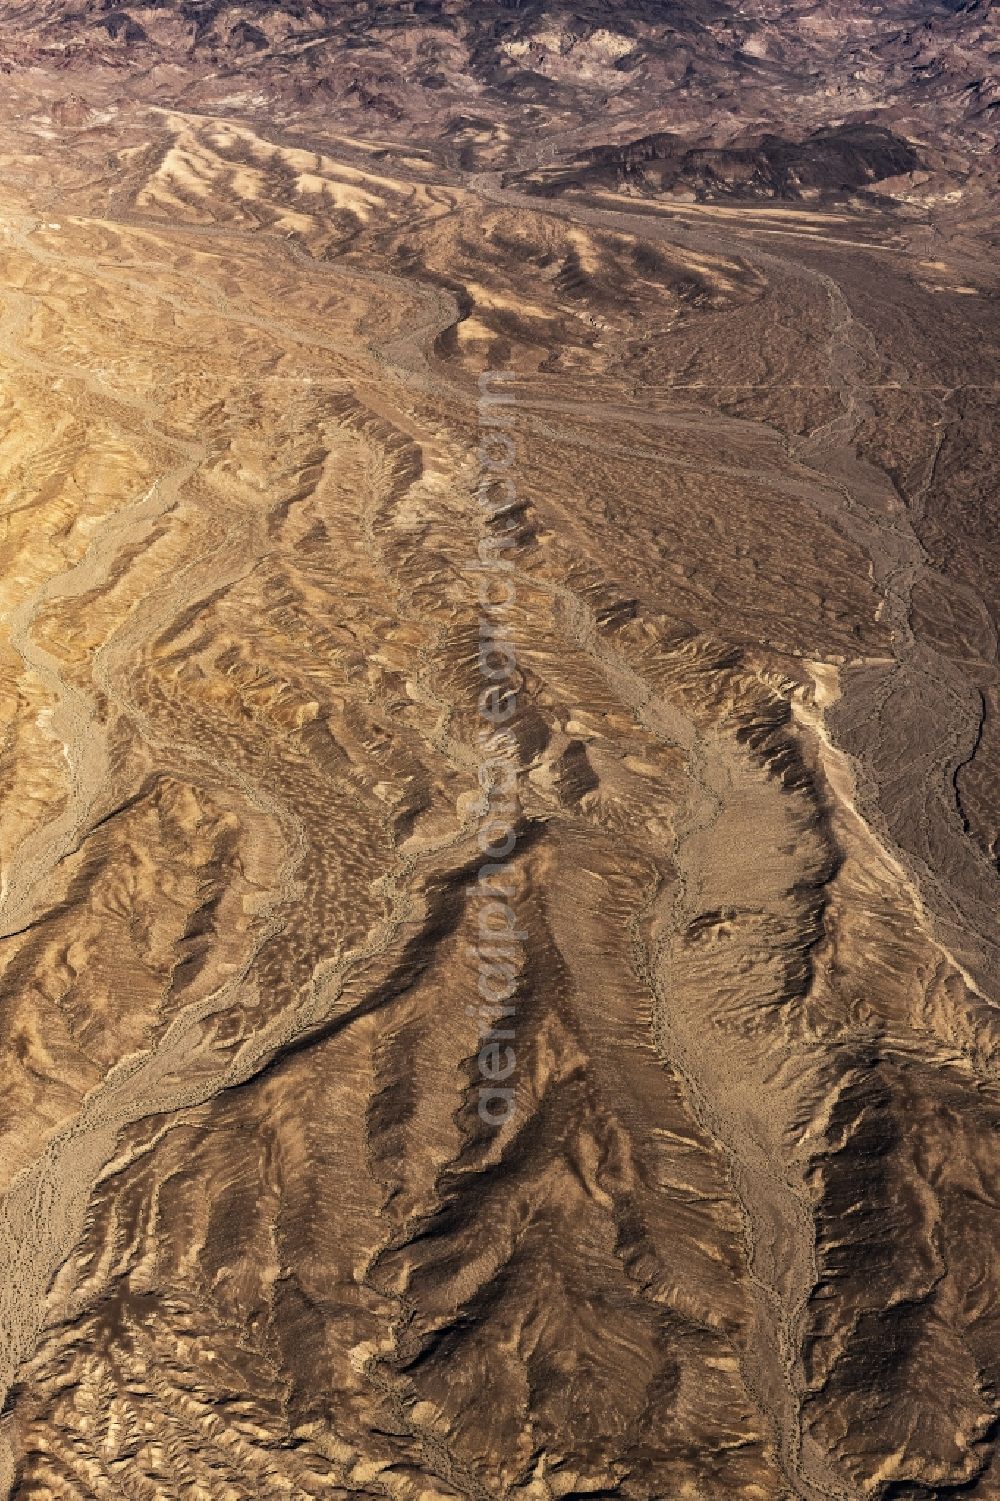 Aerial image Mohave Valley - Valley landscape surrounded by mountains in Mohave Valley in Arizona, United States of America